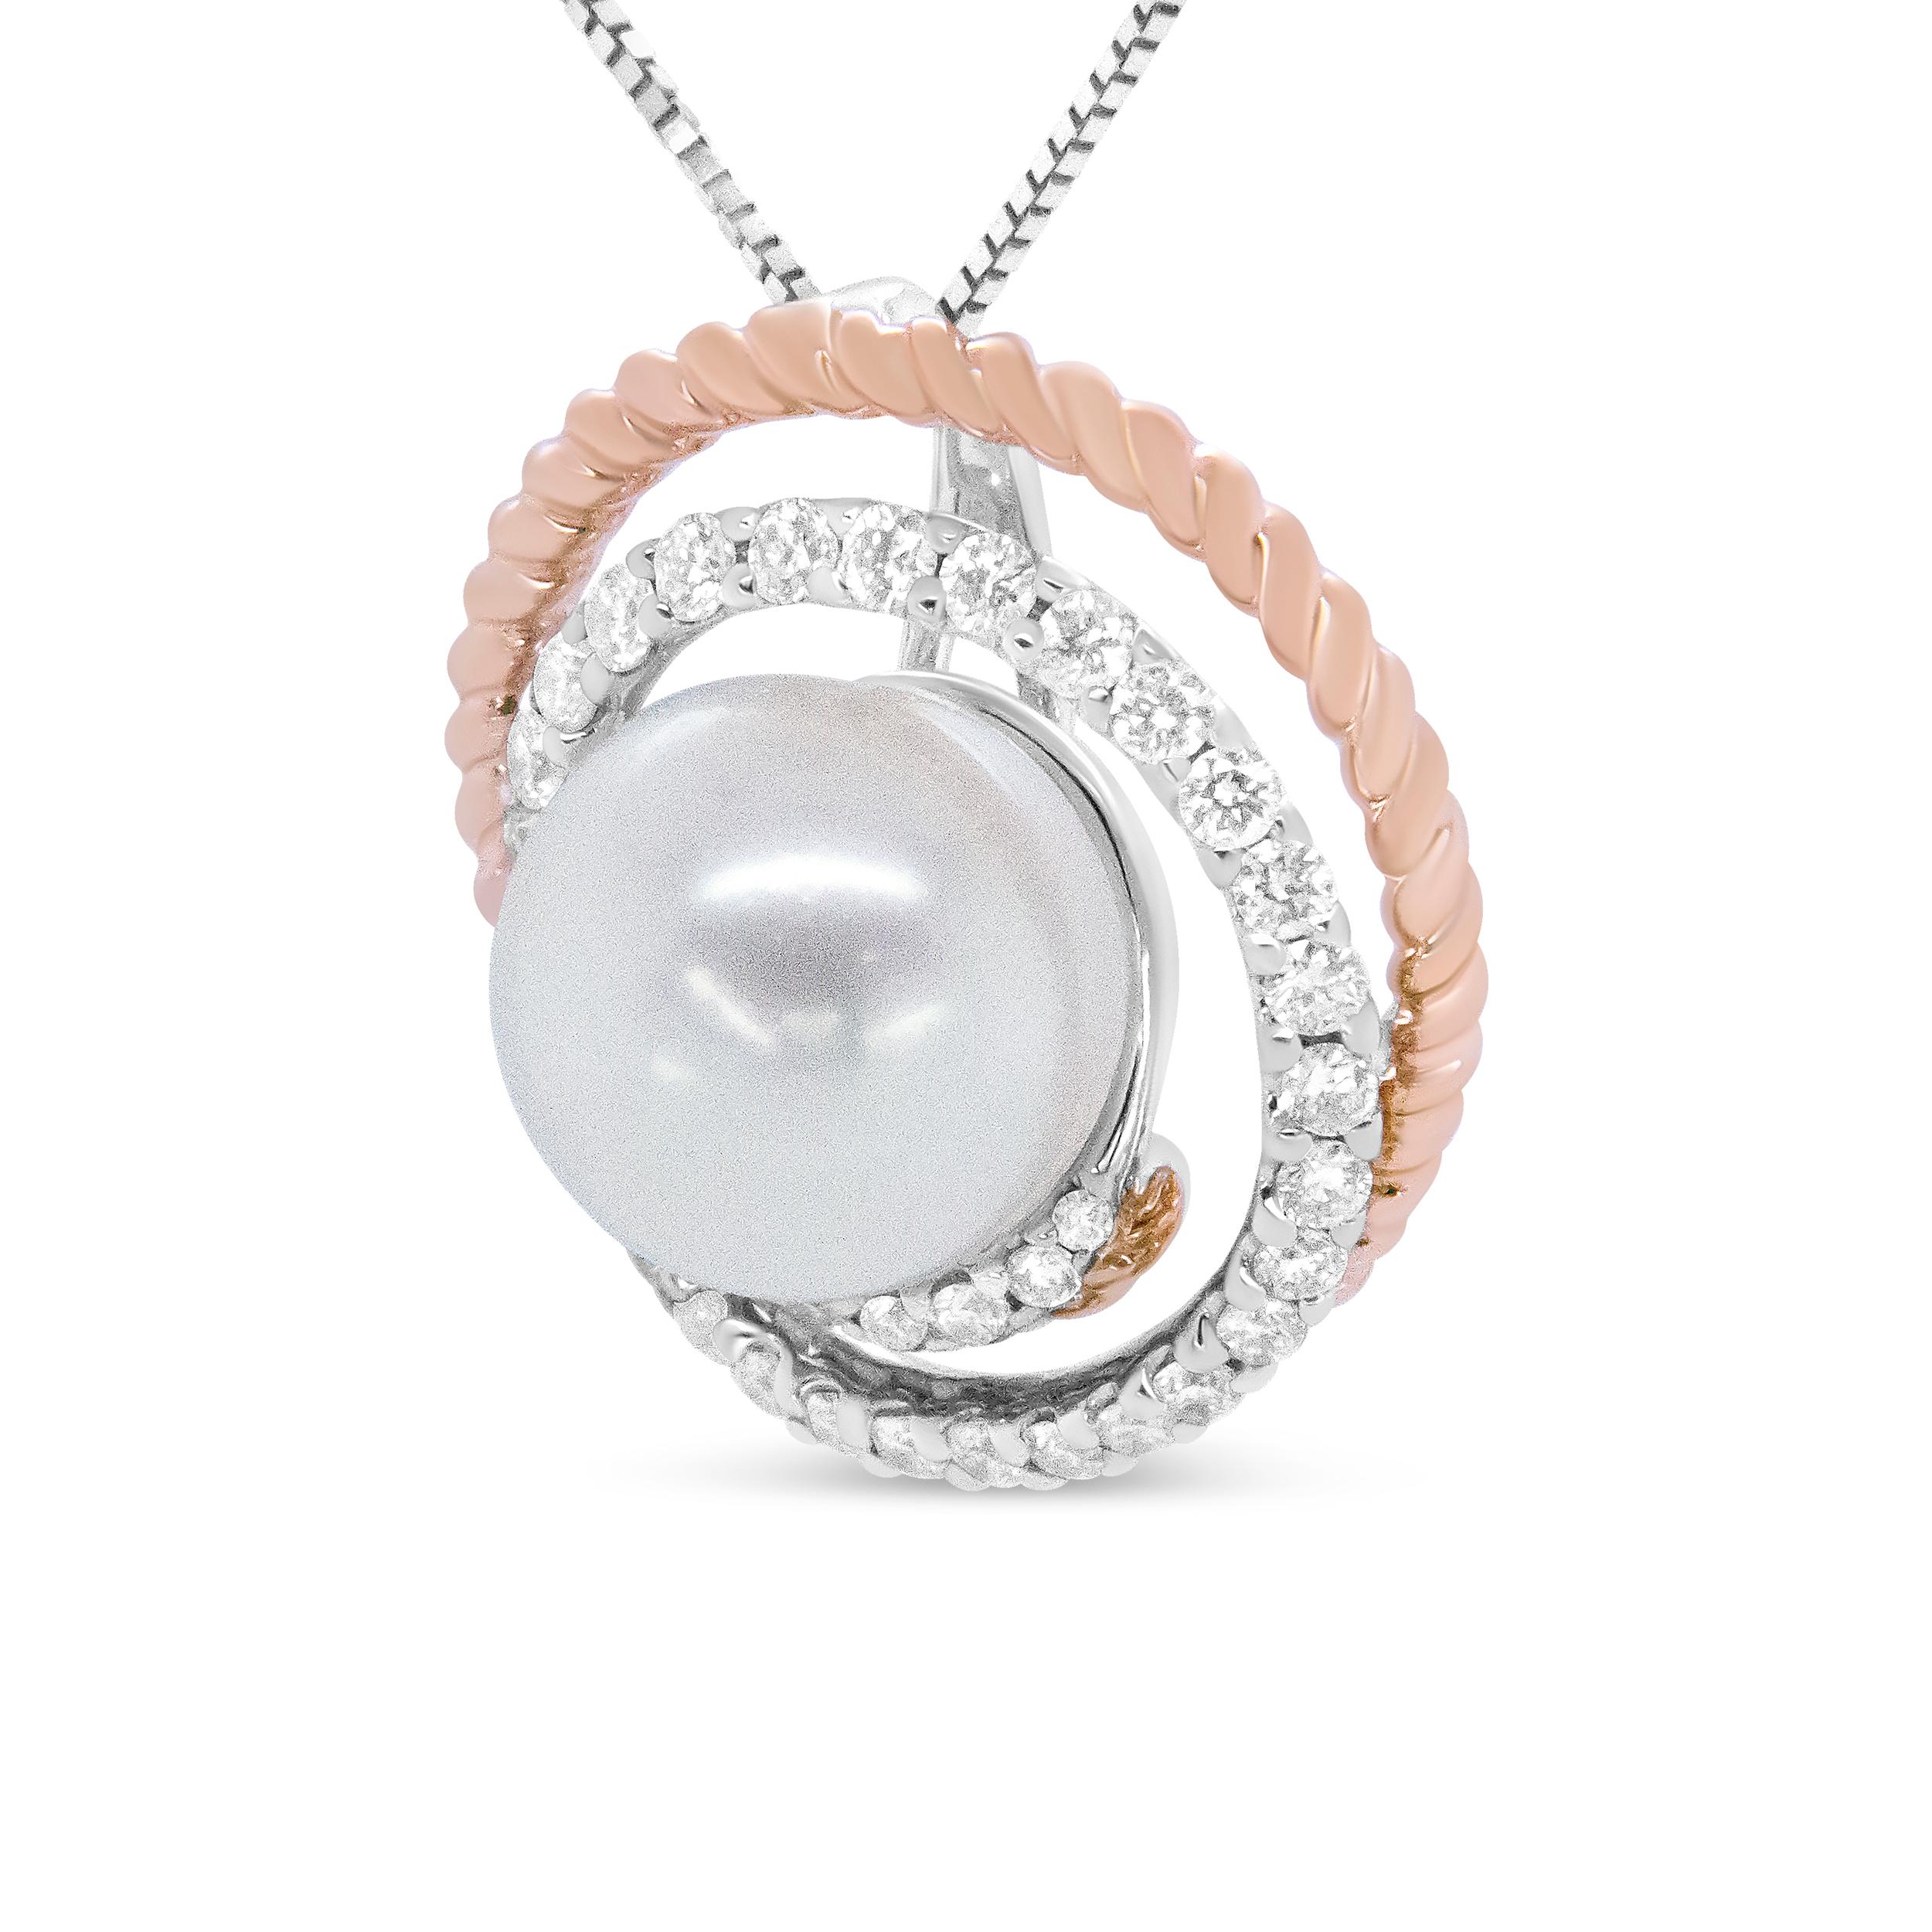 Wear a elegant feminine look with this sensational 14k rose and white gold pendant necklace.  Rhythmic, fluid spirals weave a captivating pattern that embraces a center pearl in this enchanting piece. The rose gold spiral showcases intricate